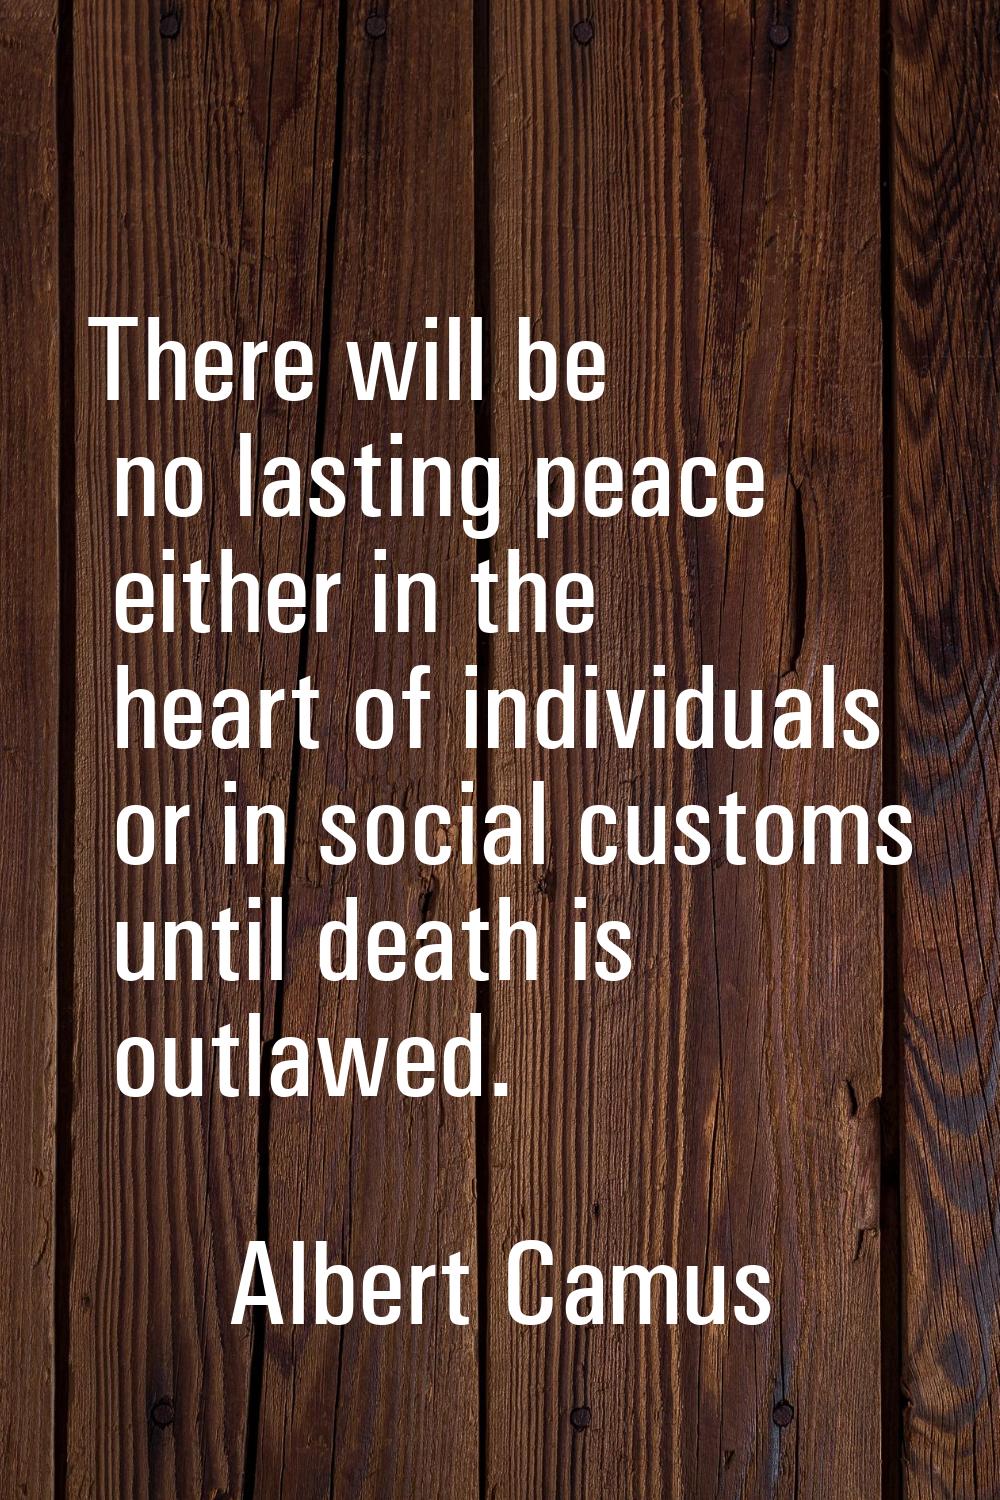 There will be no lasting peace either in the heart of individuals or in social customs until death 